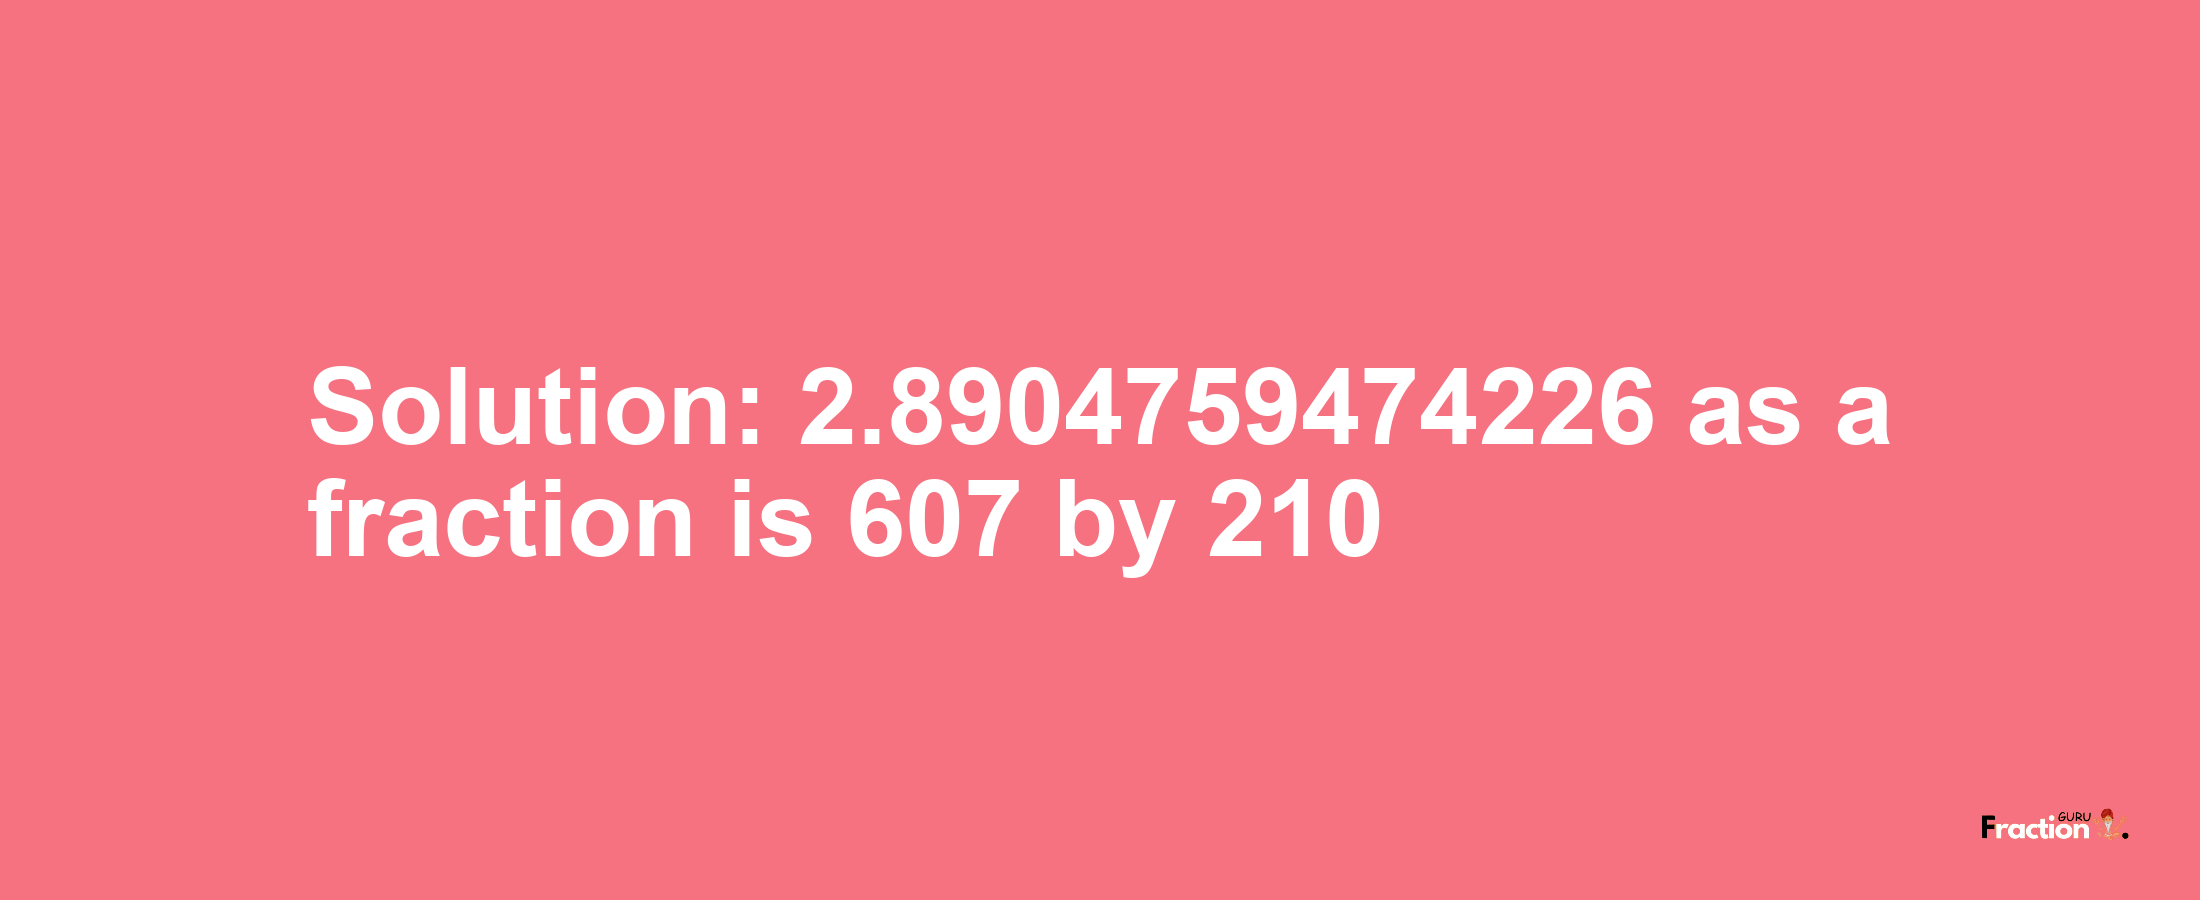 Solution:2.8904759474226 as a fraction is 607/210